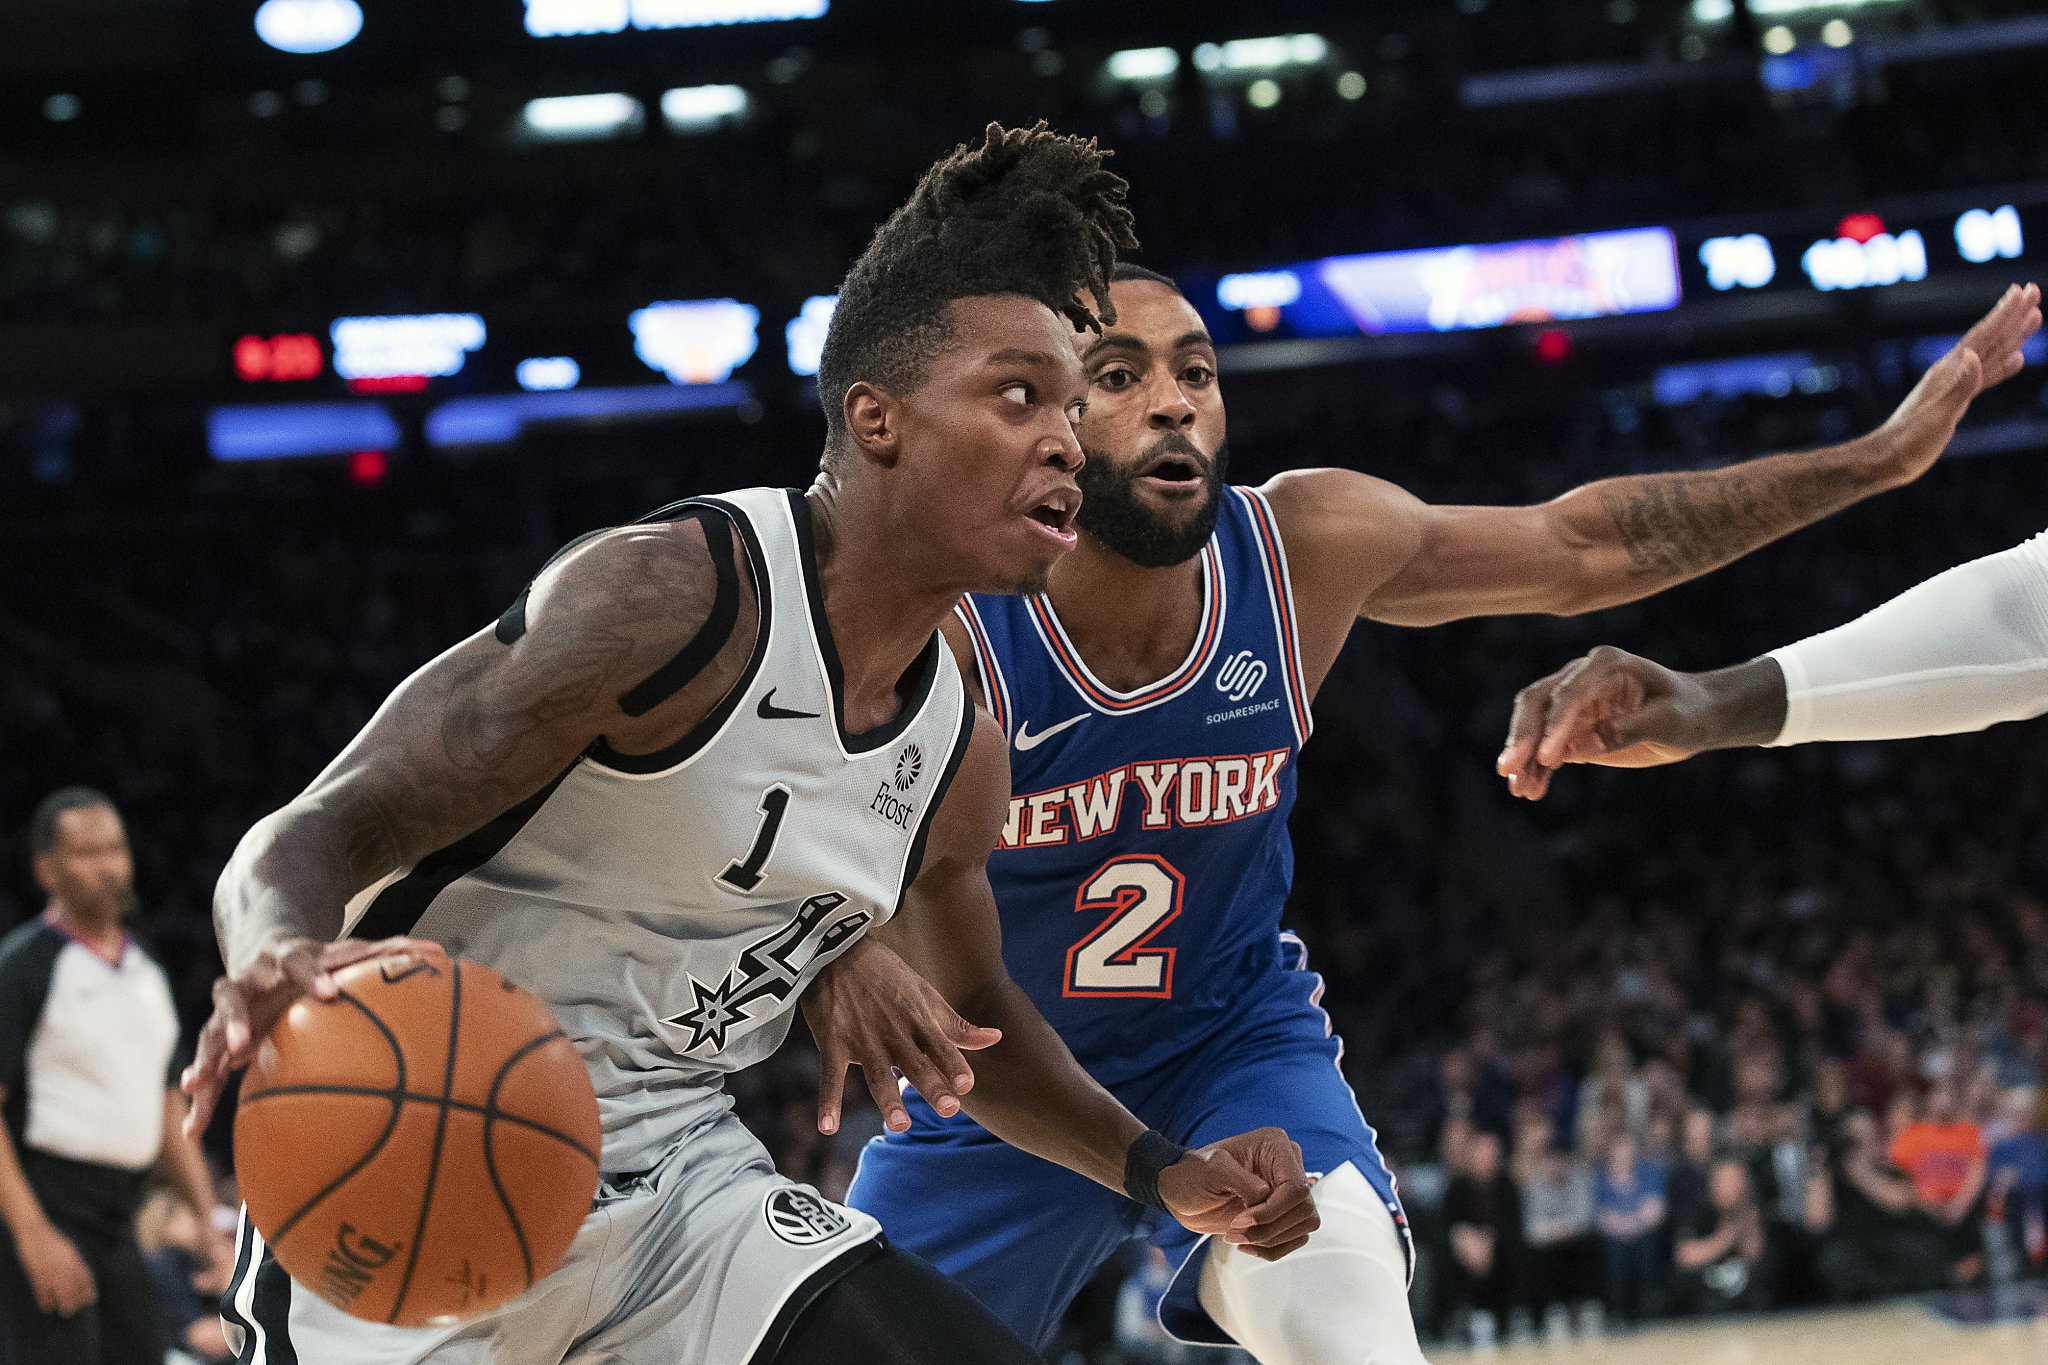 Lonnie Walker excelled as the Spurs' 'energy guy' in Wednesday's loss